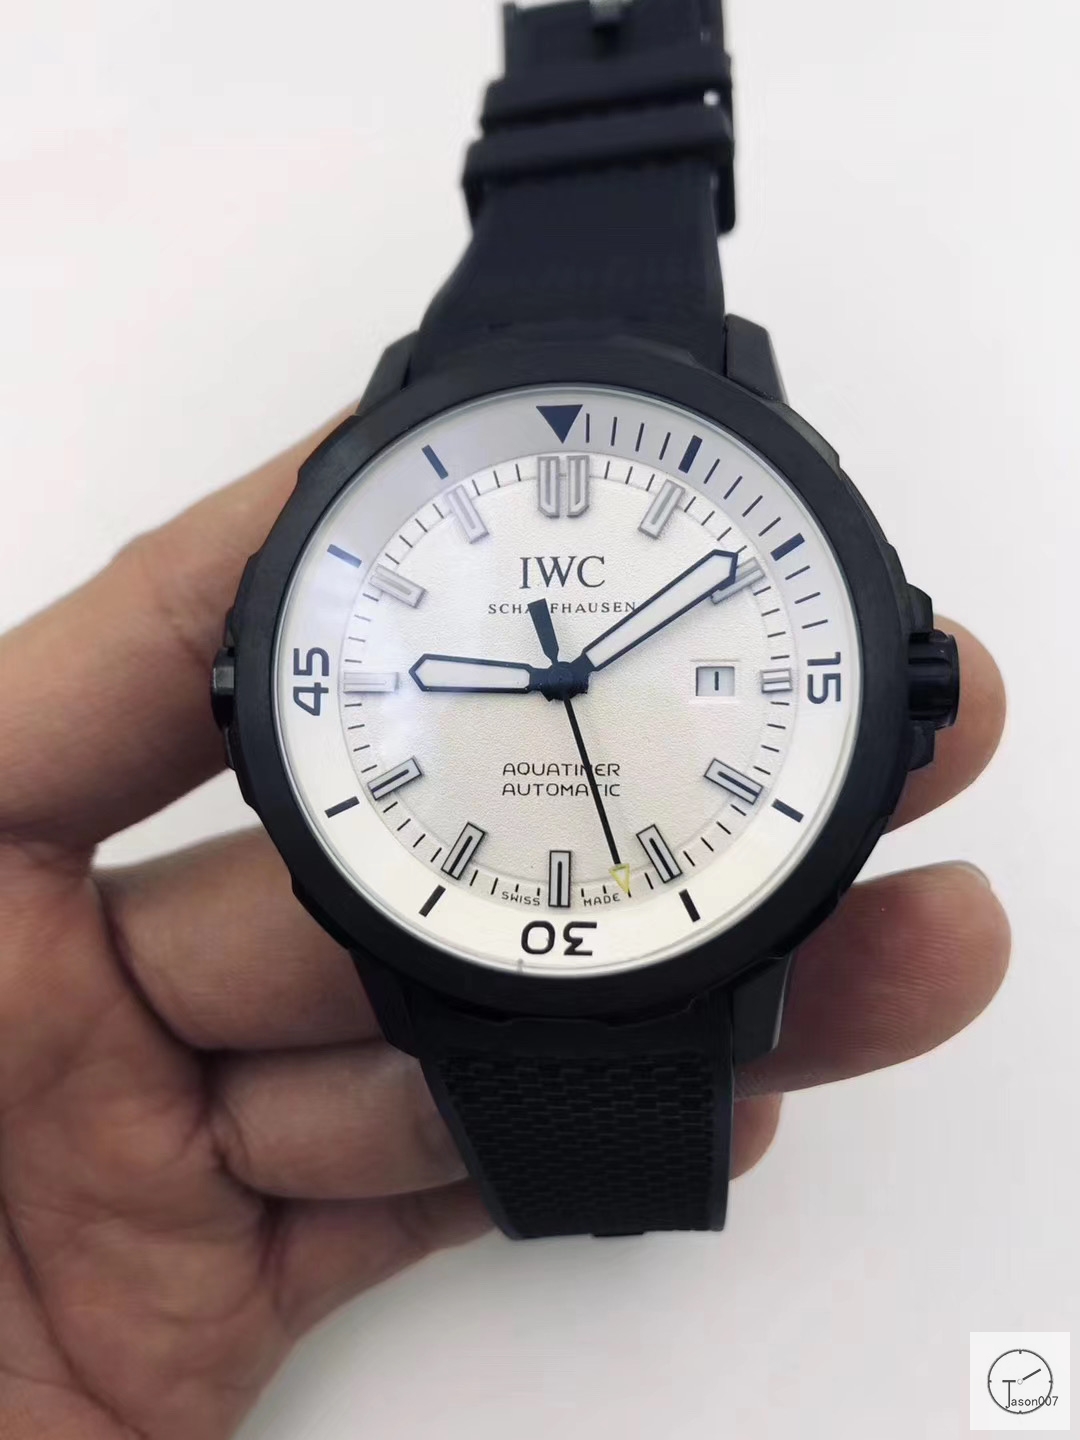 IWC AQUATIMER AUTOMATIC Mechical IW329001 42MM BLACK DIAL PVD Case Rubber Strap Mens Wristwatches ICW22080560